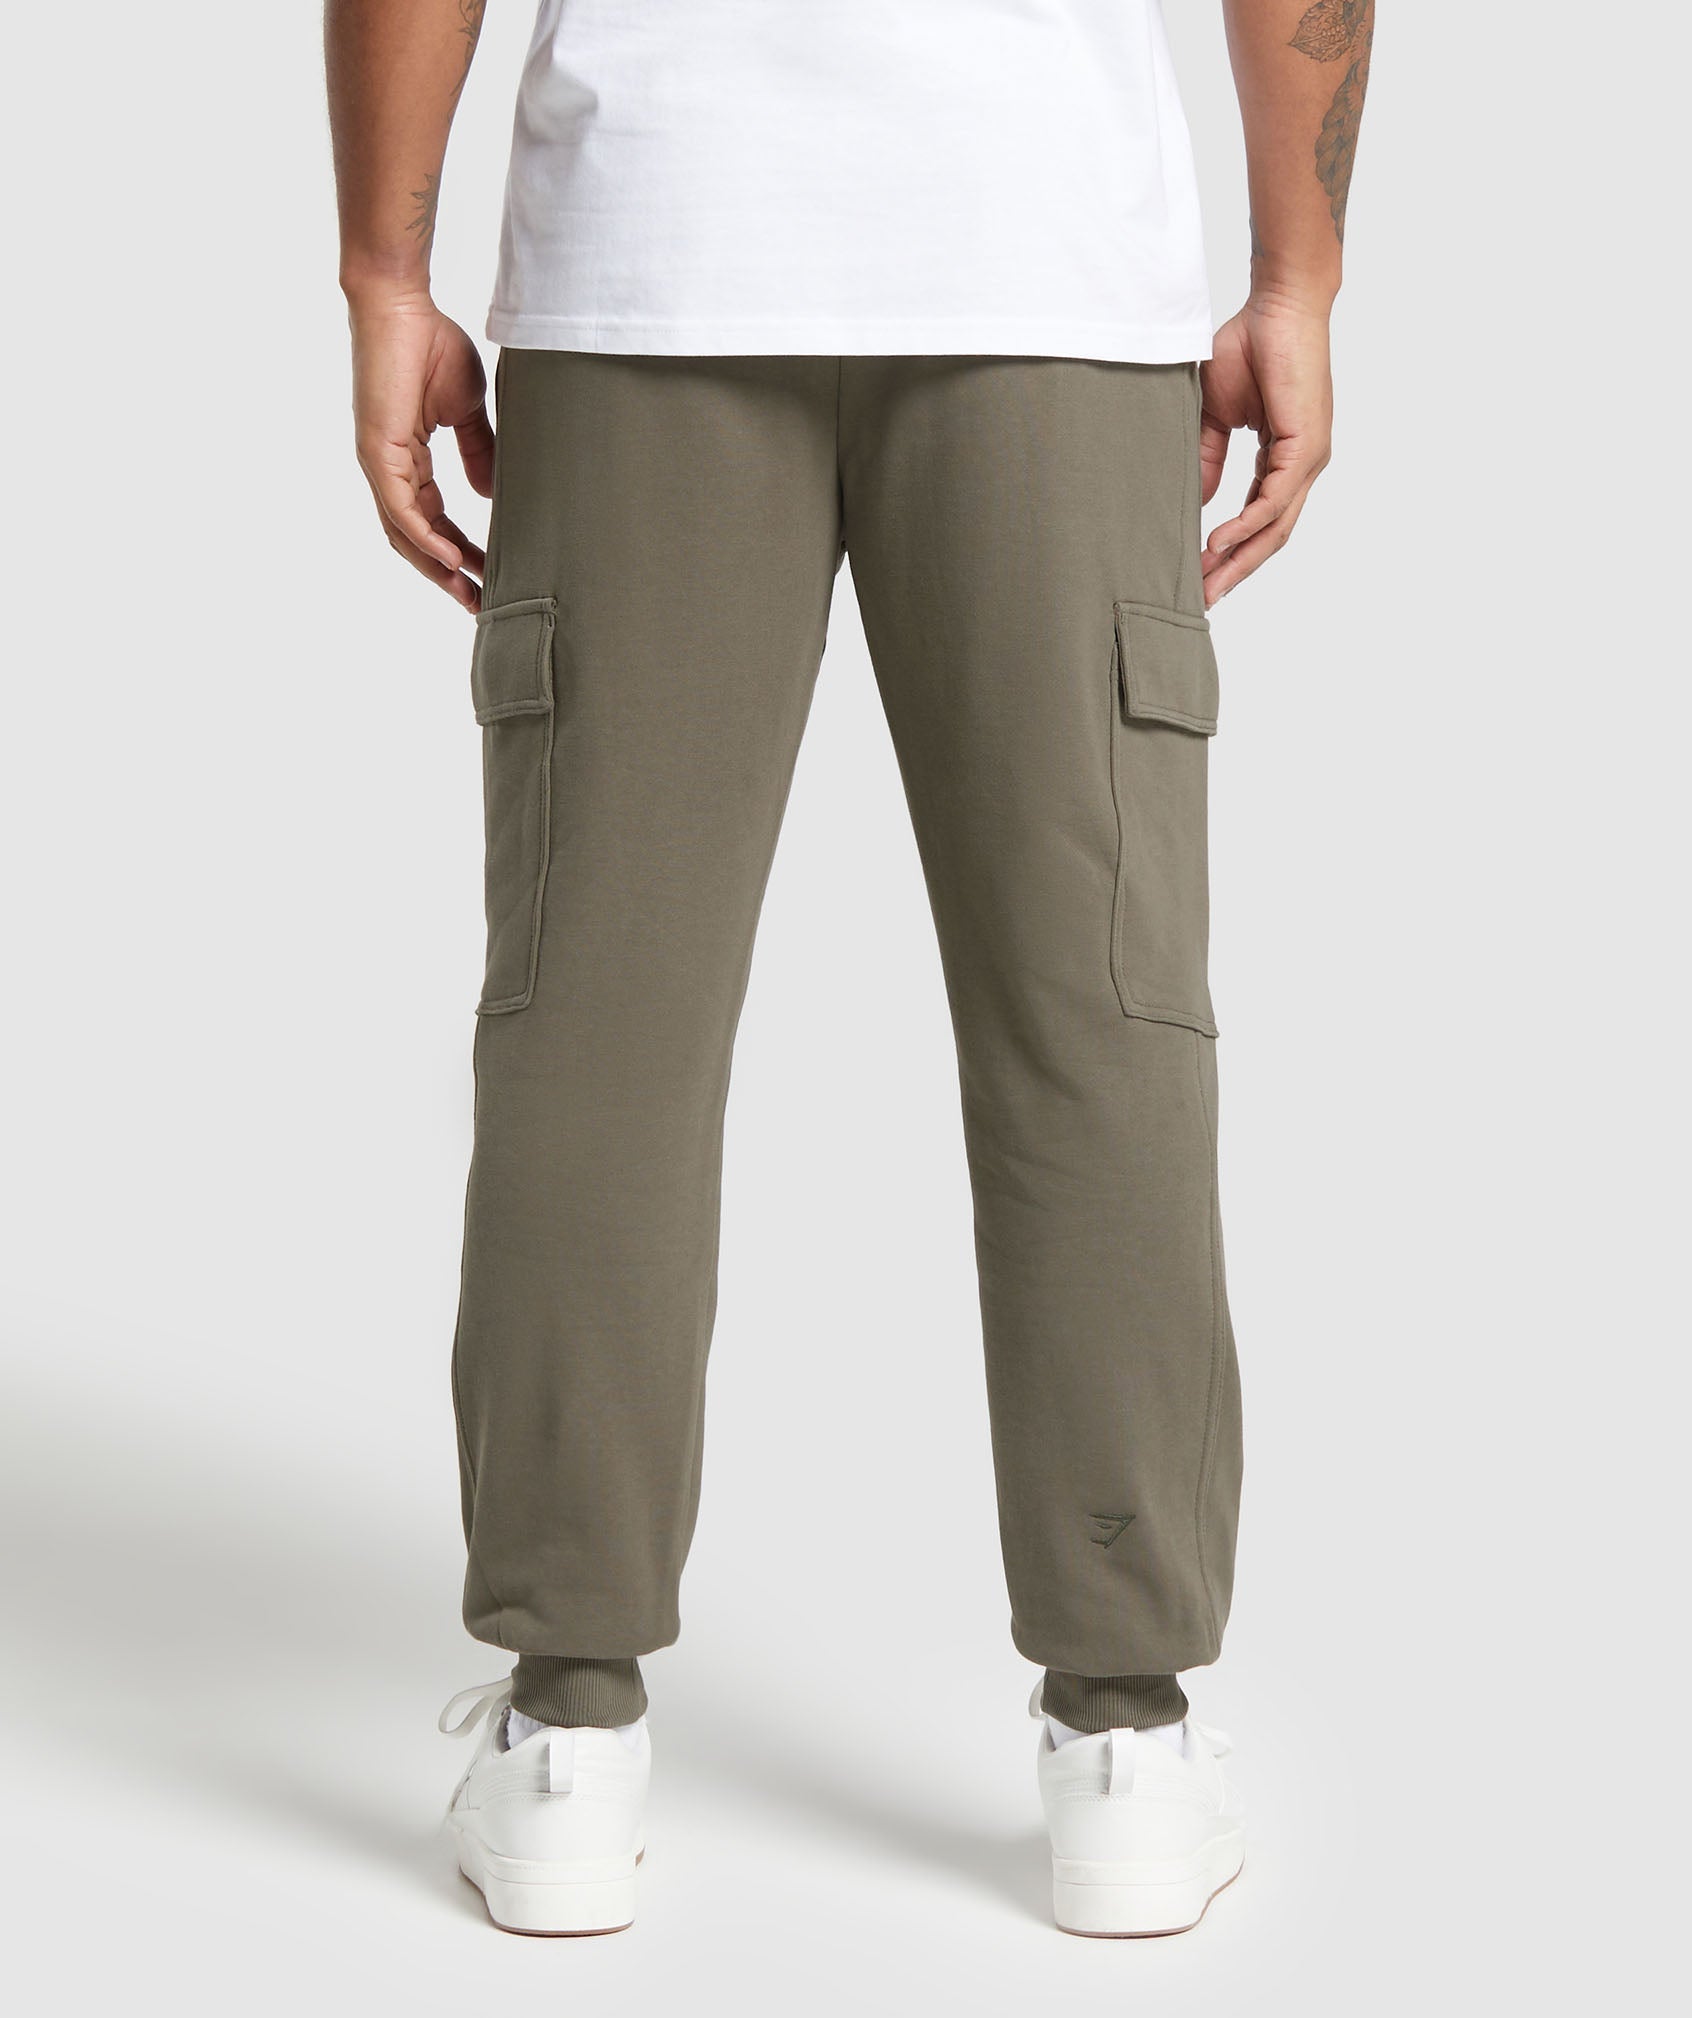 Rest Day Essentials Cargo Joggers in Camo Brown - view 2